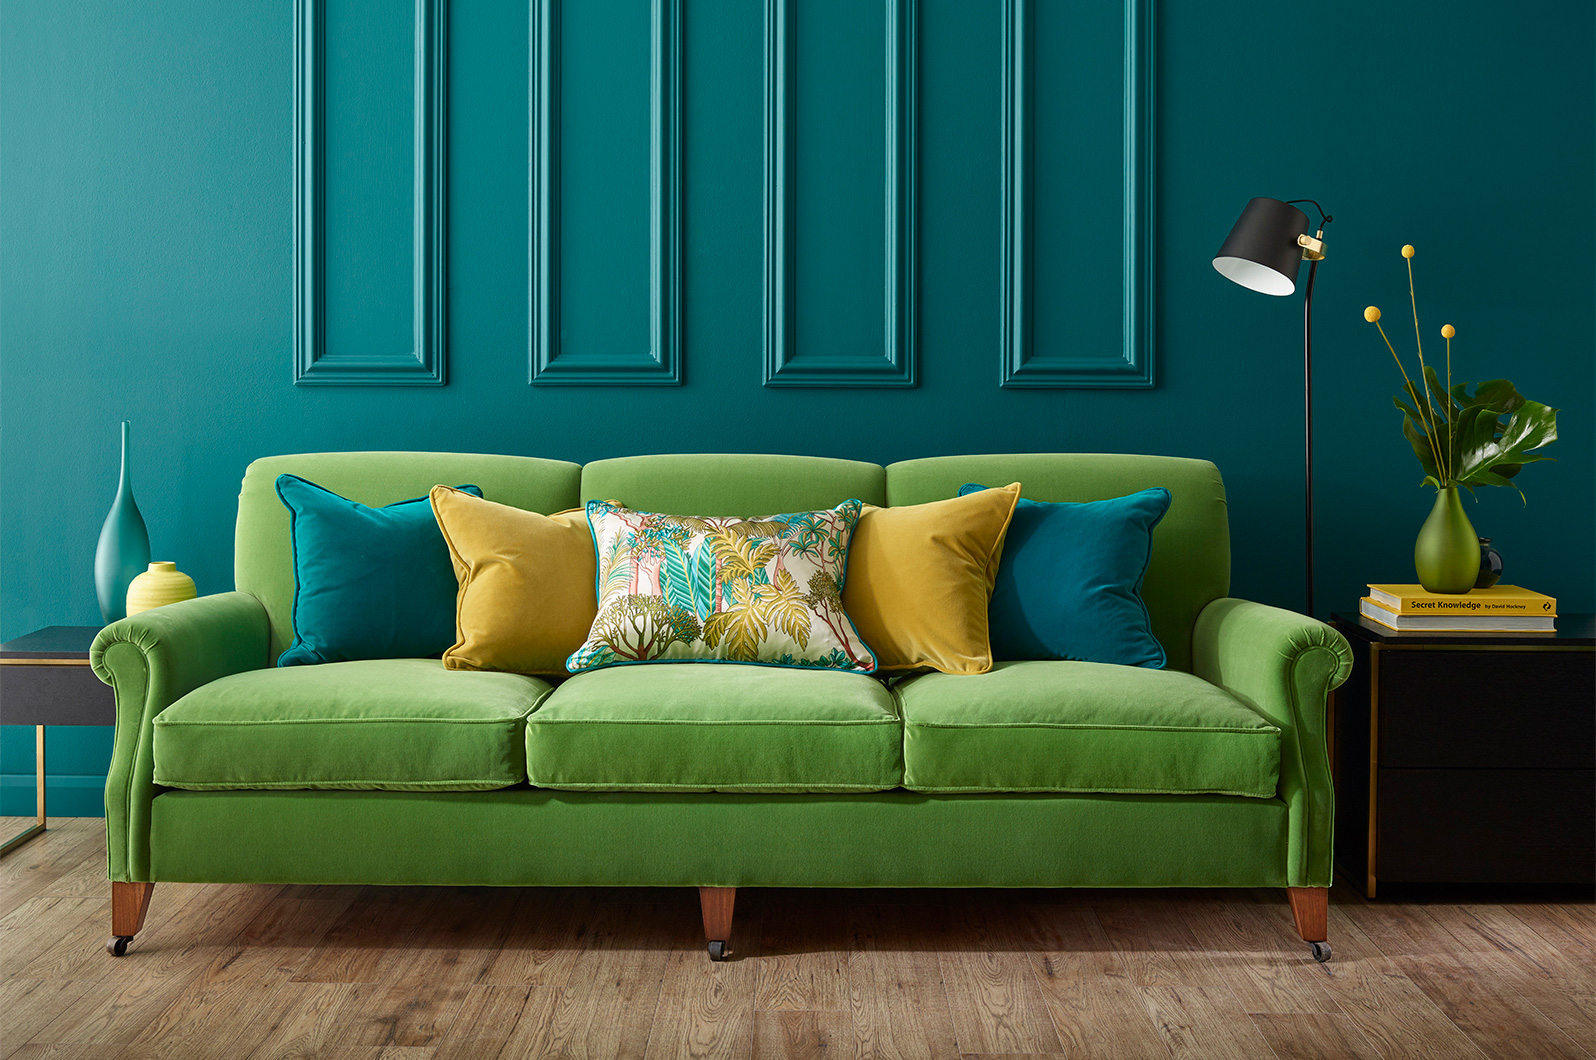 Studio roomset photography for Kingcome Sofas.